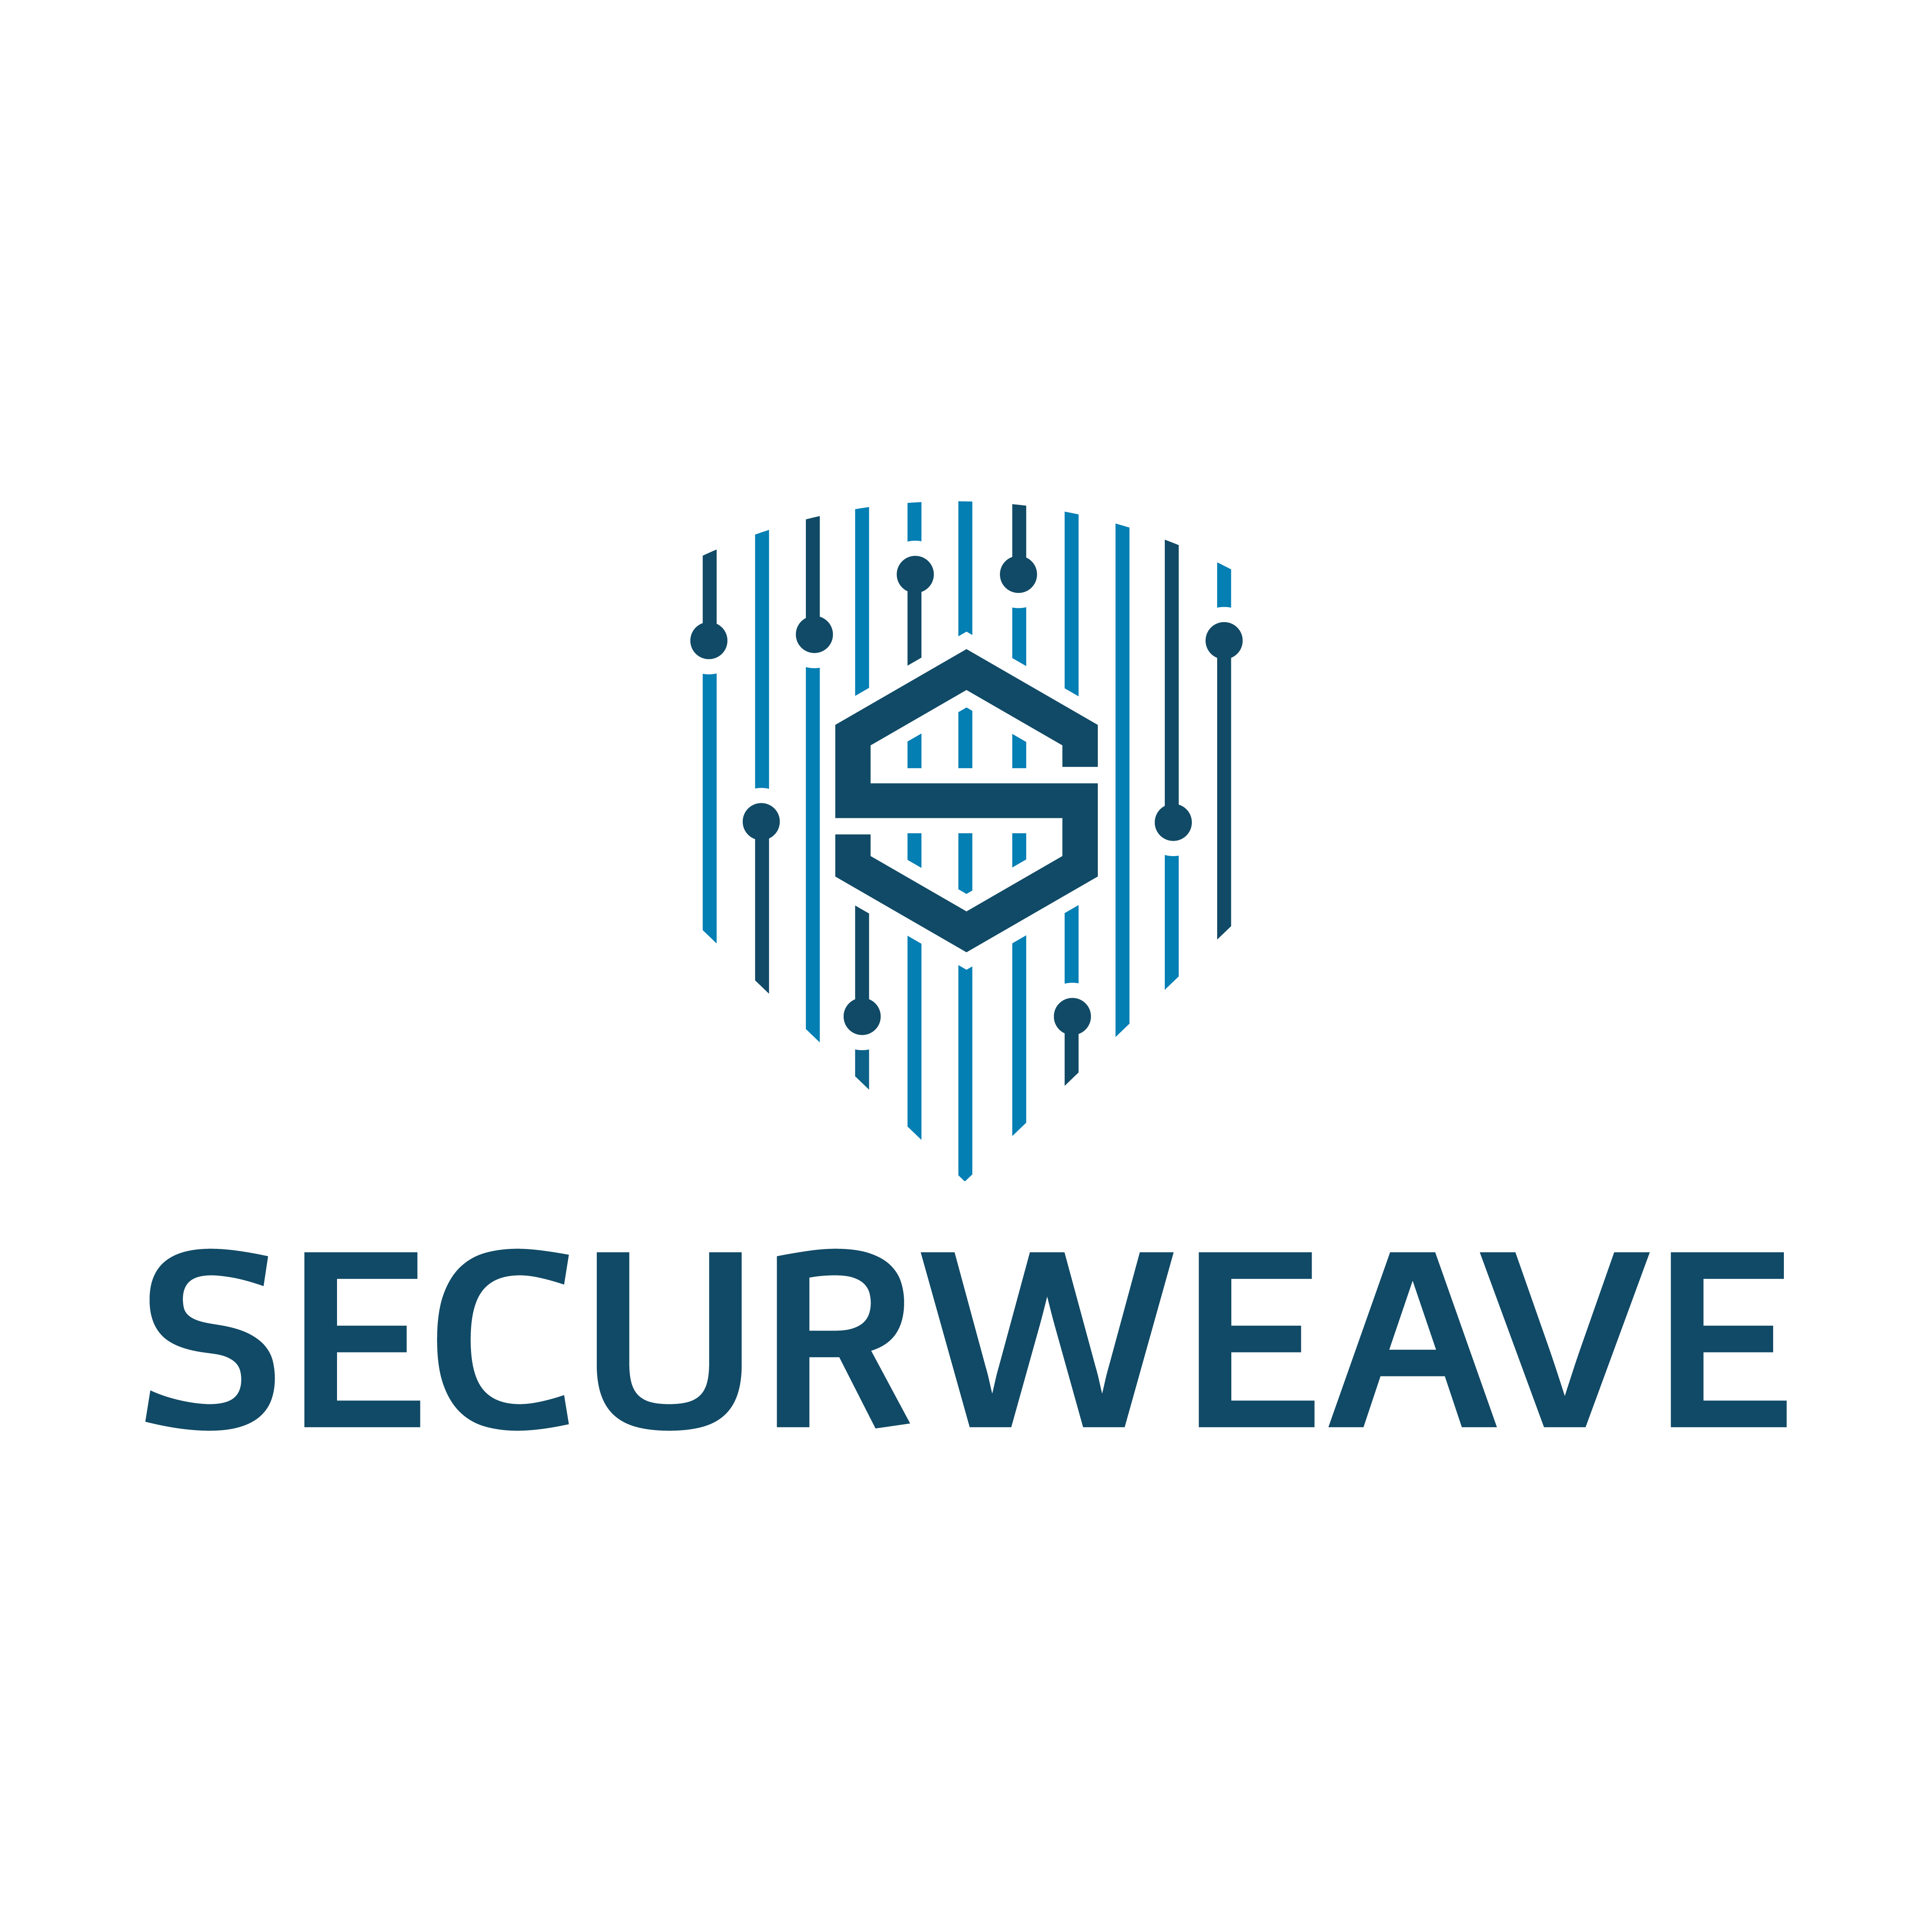 SECURWEAVE RAISES INR 2.8 CRORE IN SEED ROUND LED BY IAN